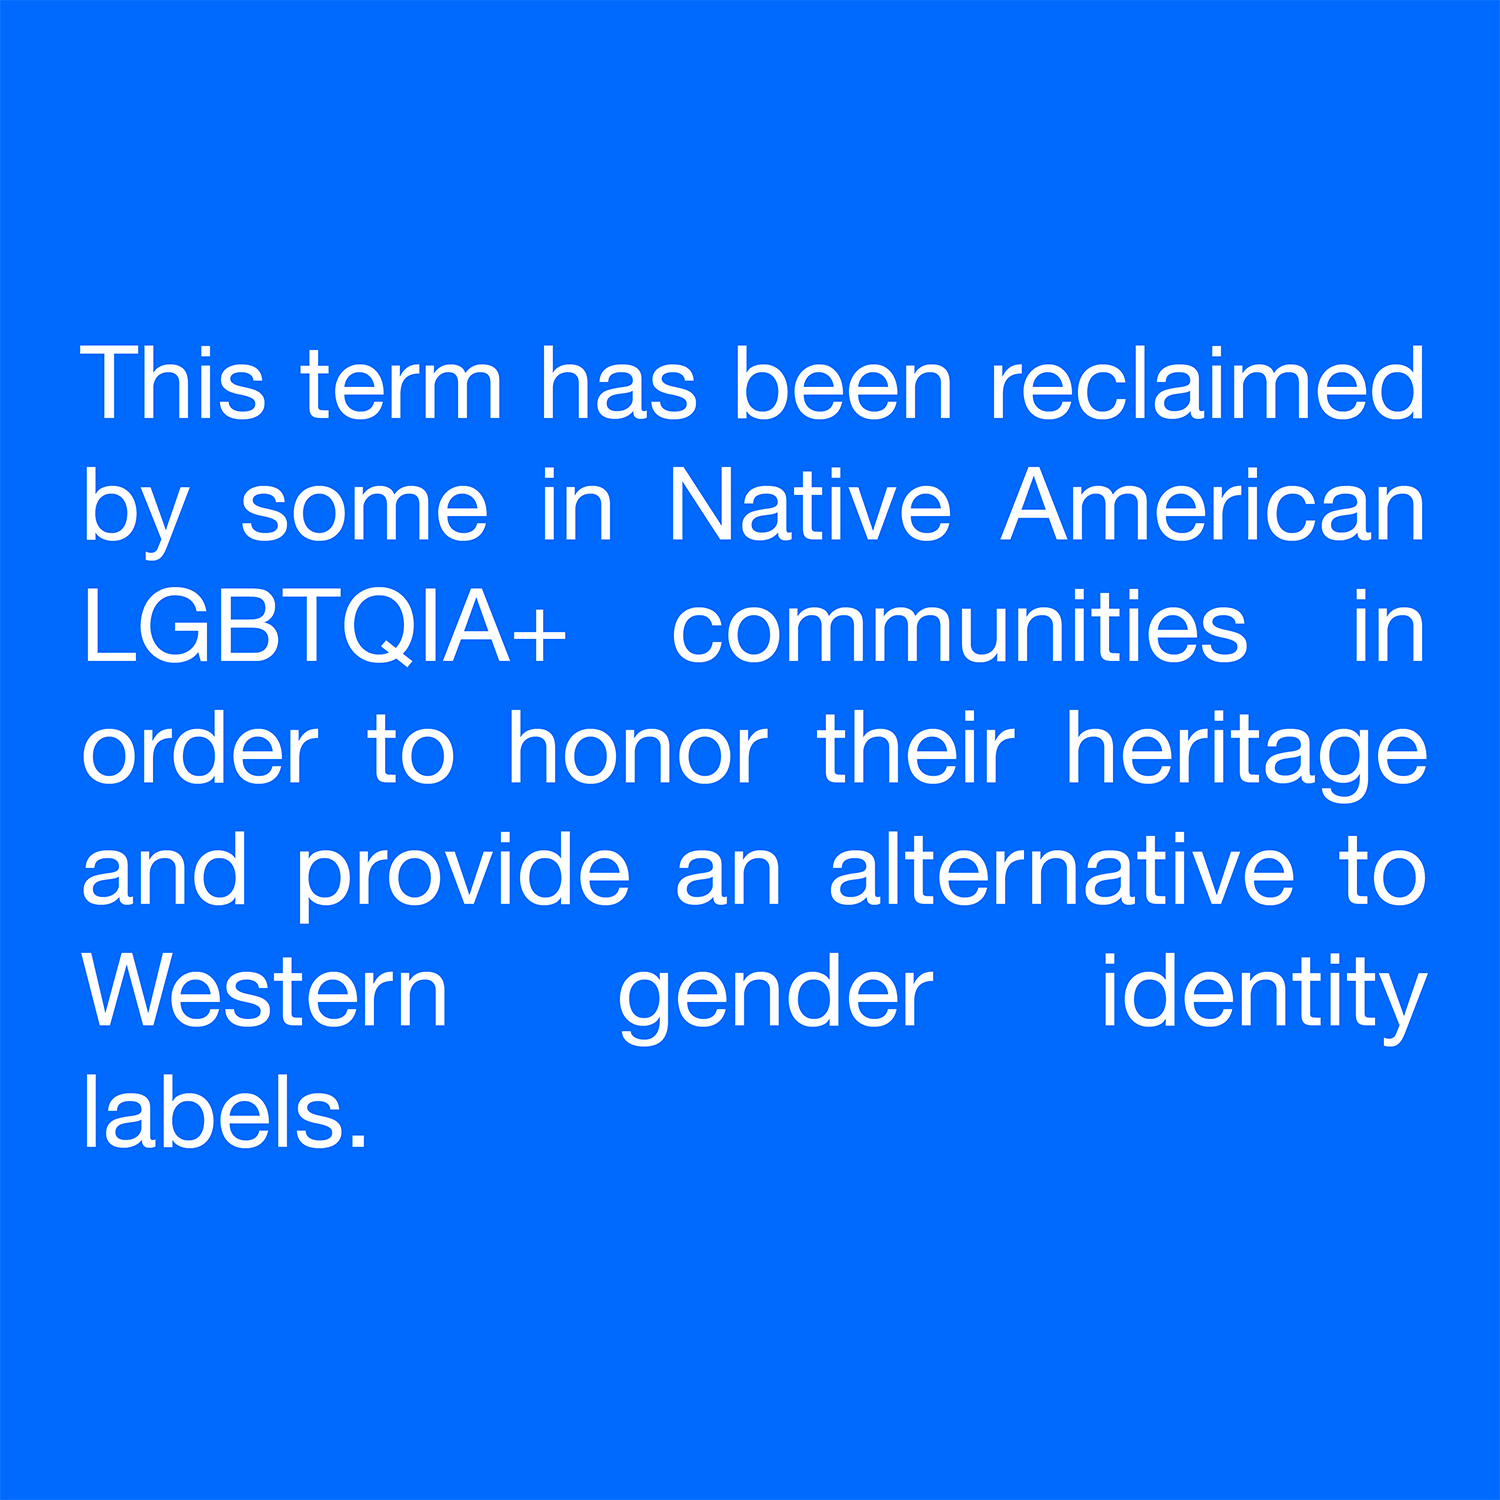  This term has been reclaimed by some in Native American LGBTQIA+ communities in order to honor their heritage and provide an alternative to Western gender identity labels. 